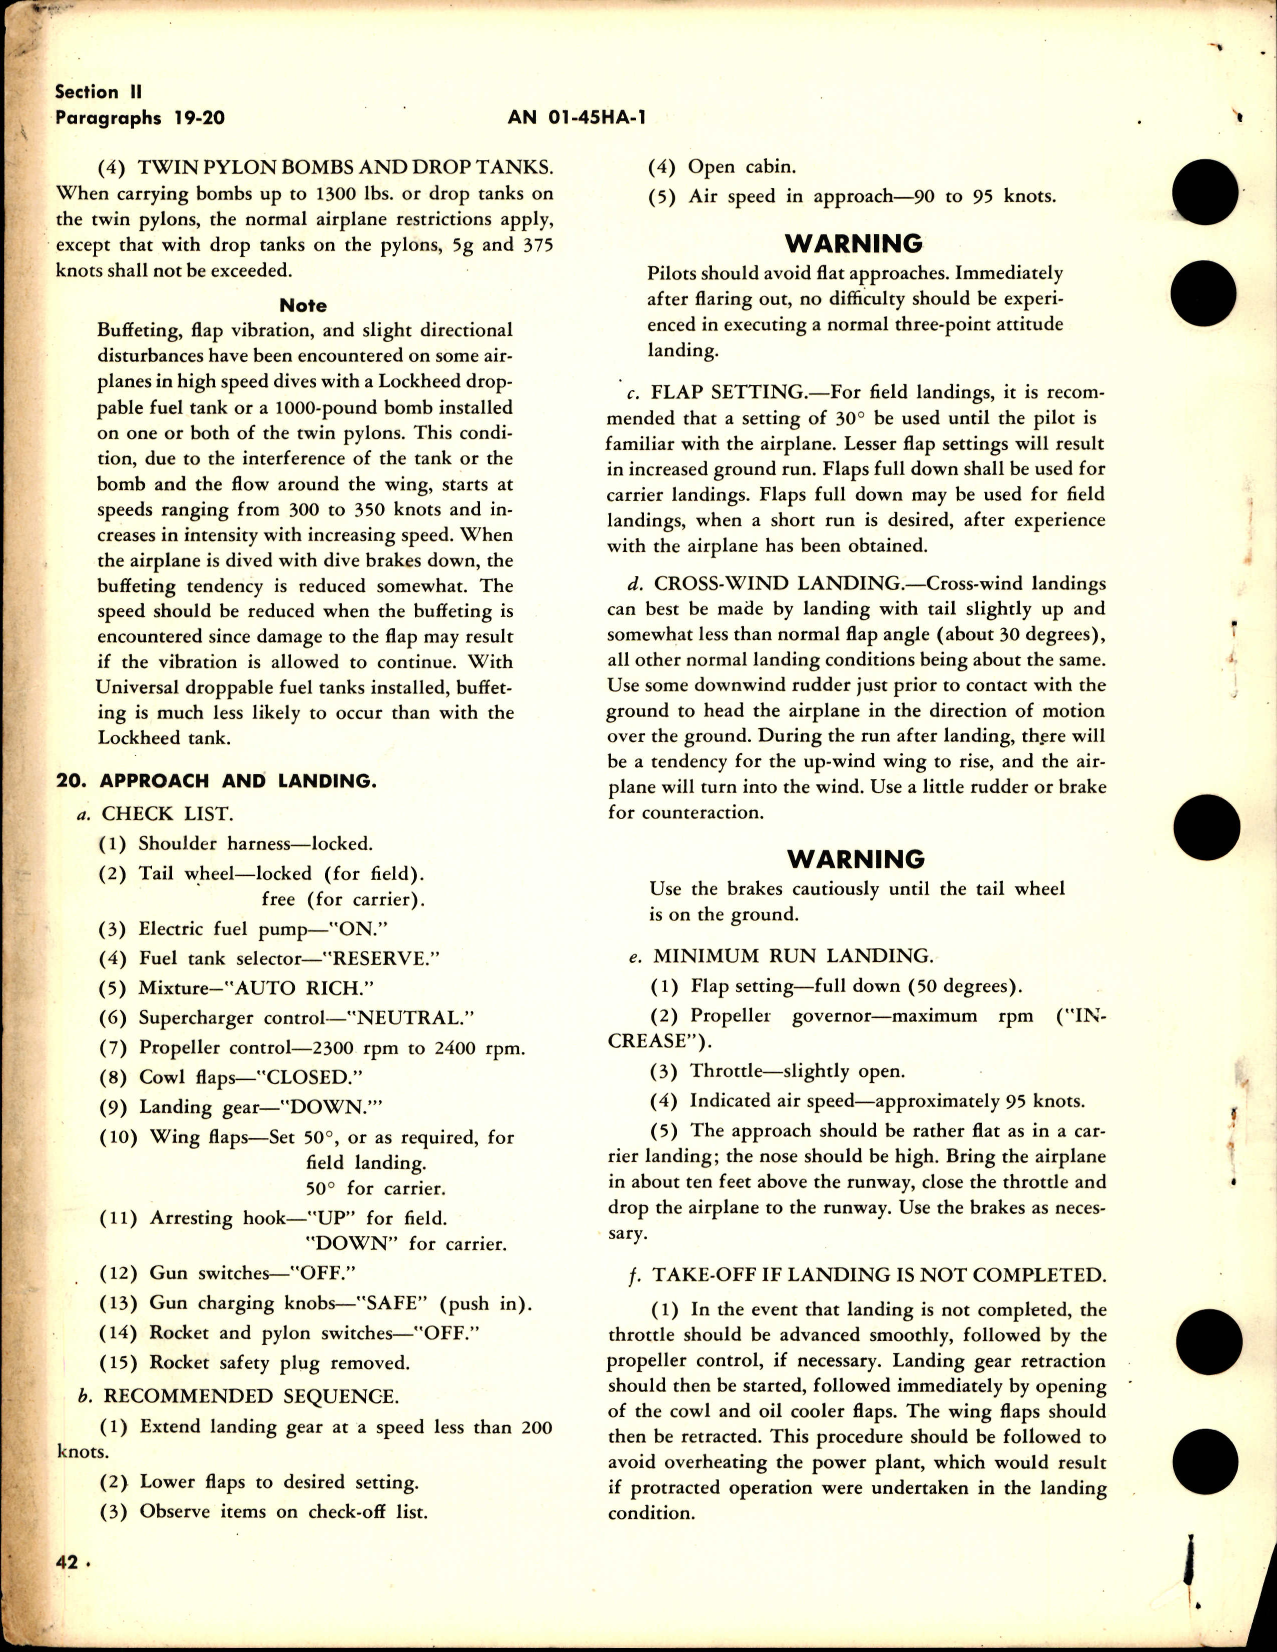 Sample page 8 from AirCorps Library document: Pilot's Handbook for F4U-1, F4U-1C, F4U-1D, F3A-1, FG-1, FG-1D